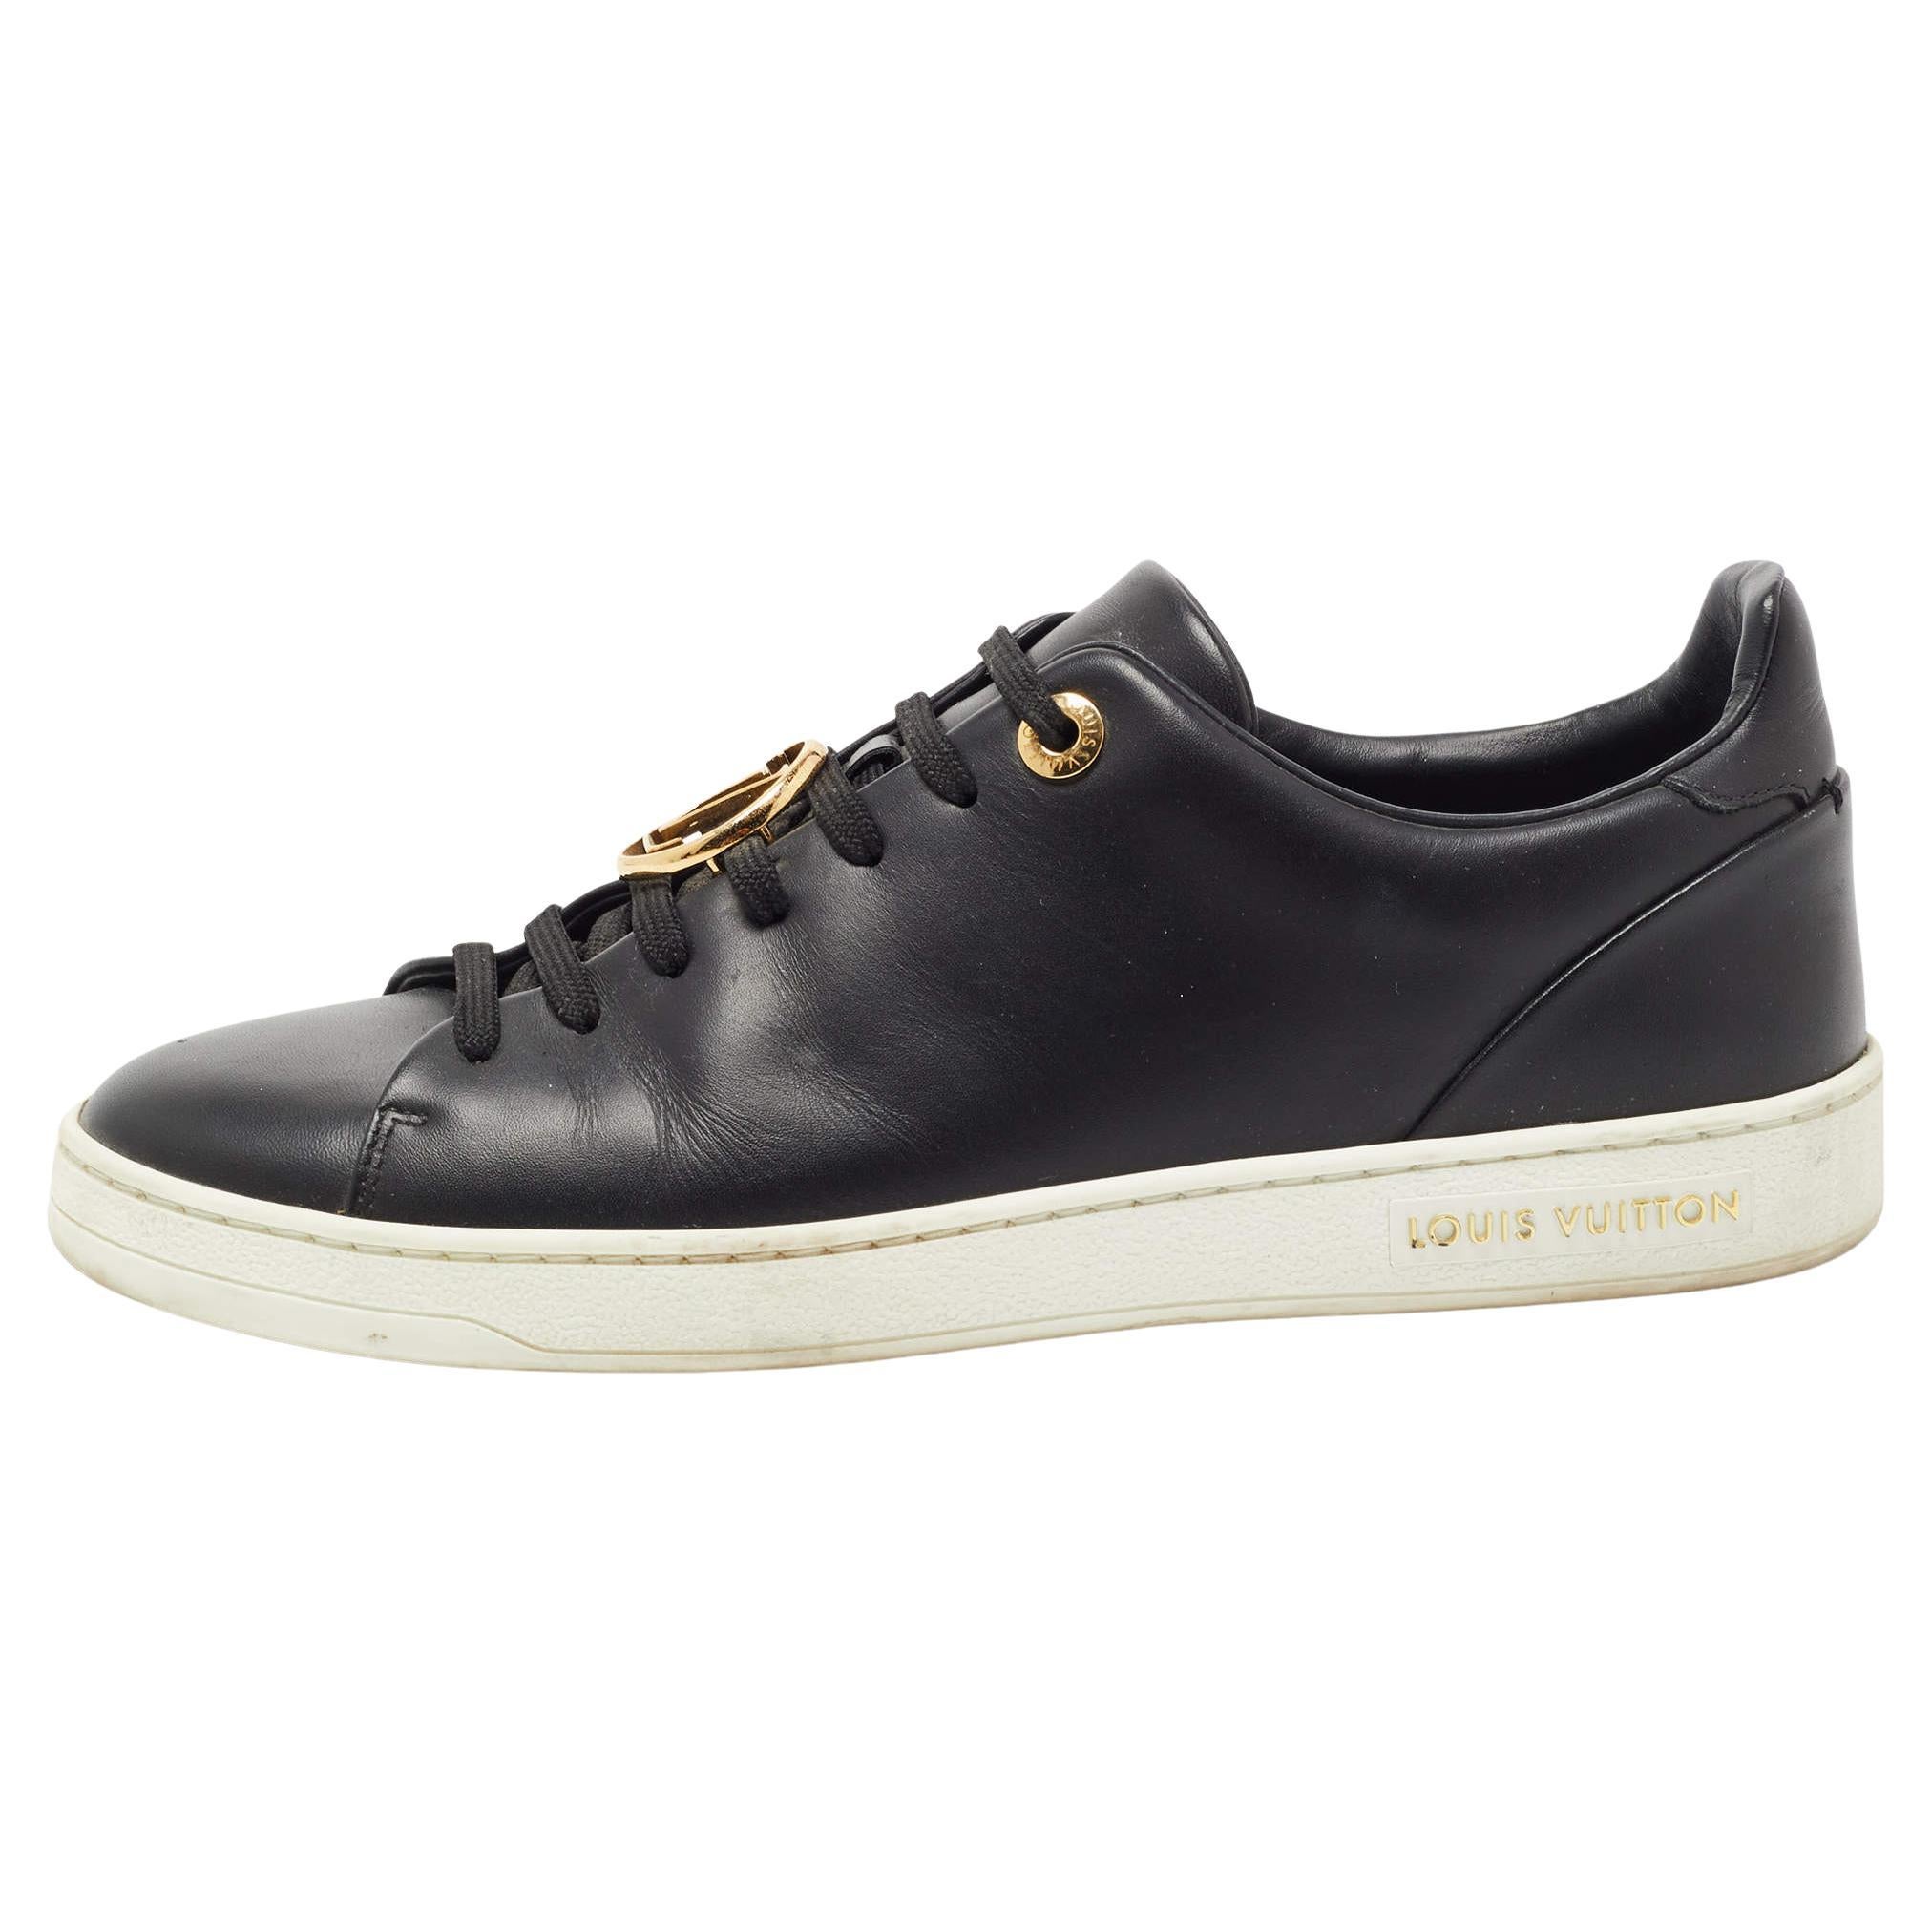 Louis Vuitton Black Leather FRONTROW Sneakers Size 38